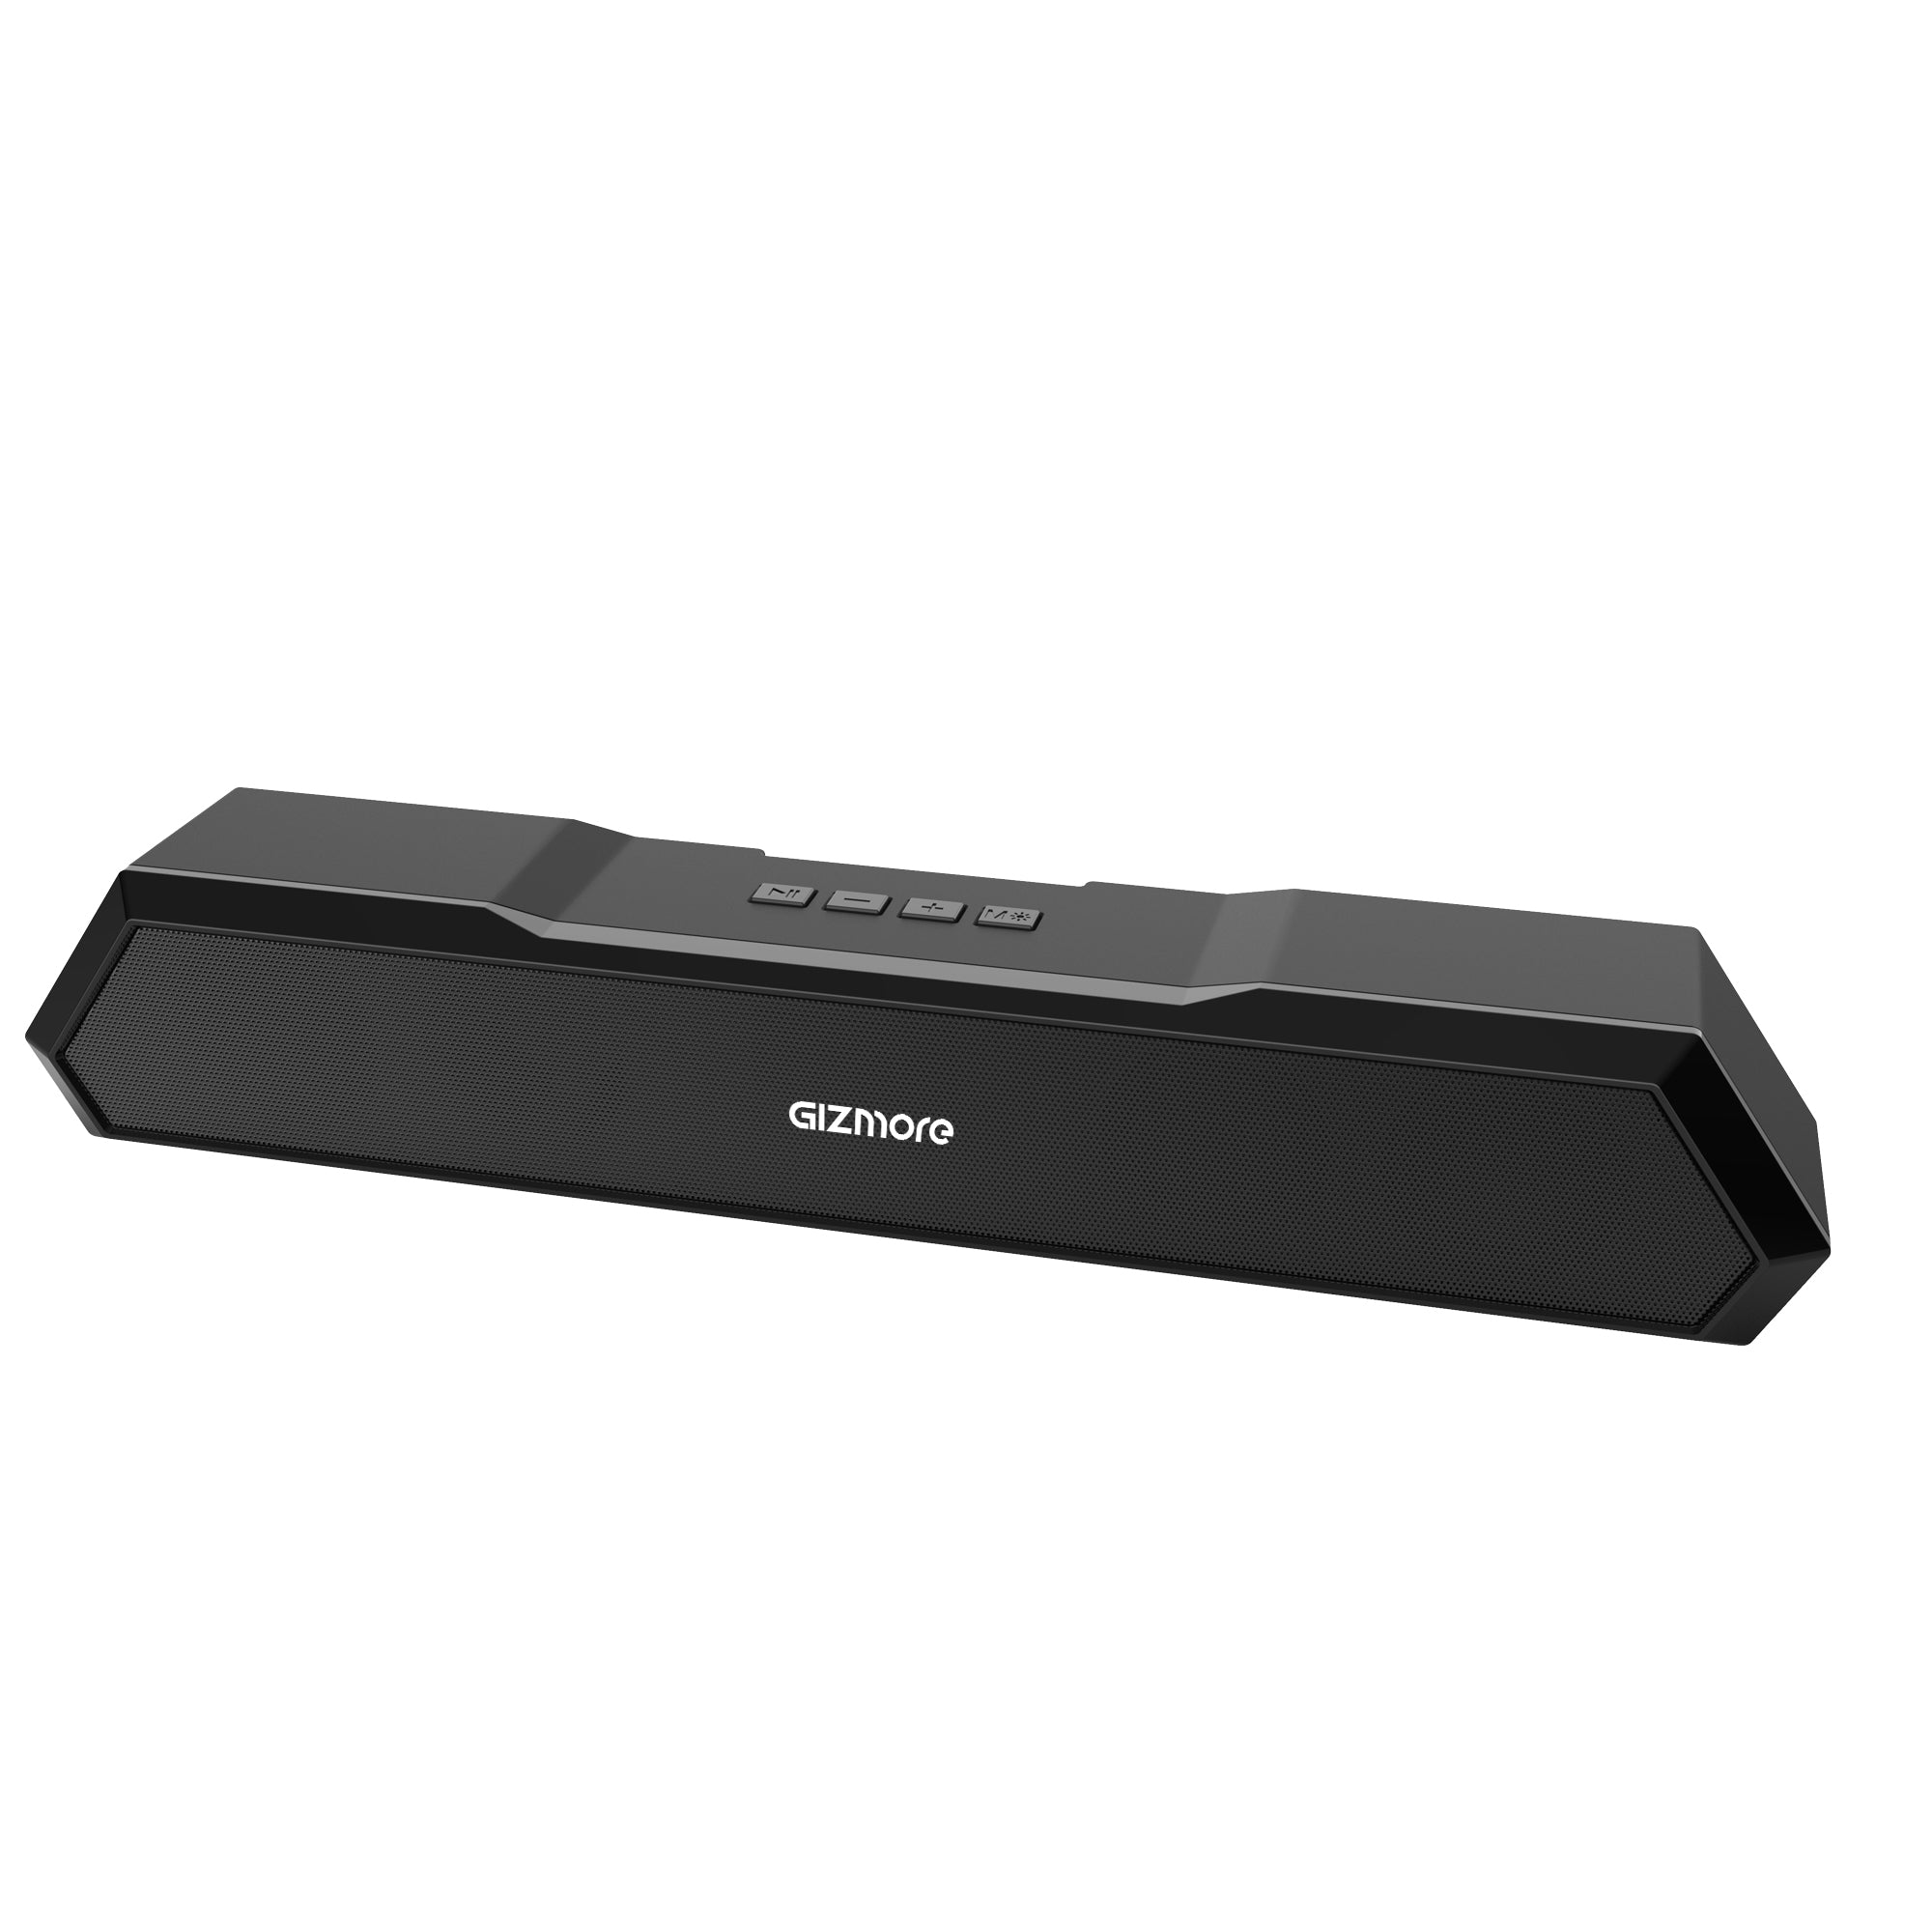 Gizmore Gizbar 1200 TWS Function & Matte Finish with Aqad Mode for Upto 6 Hours Playtime 12 W Bluetooth Soundbar  (Black, Stereo Channel)